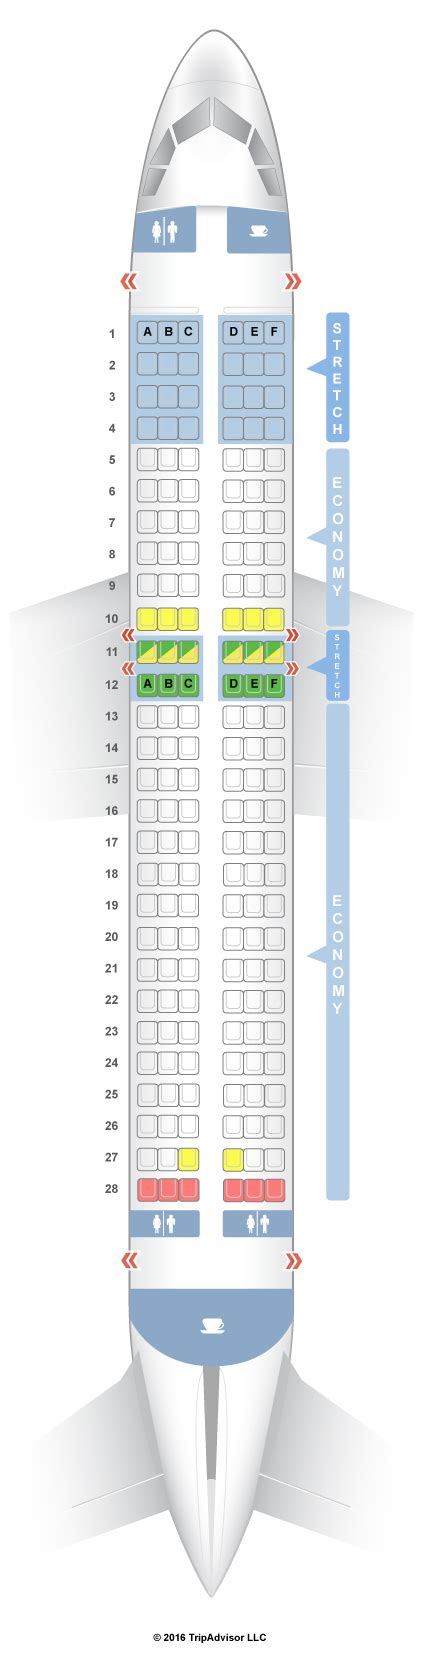 Find out more about our seating configurations for our